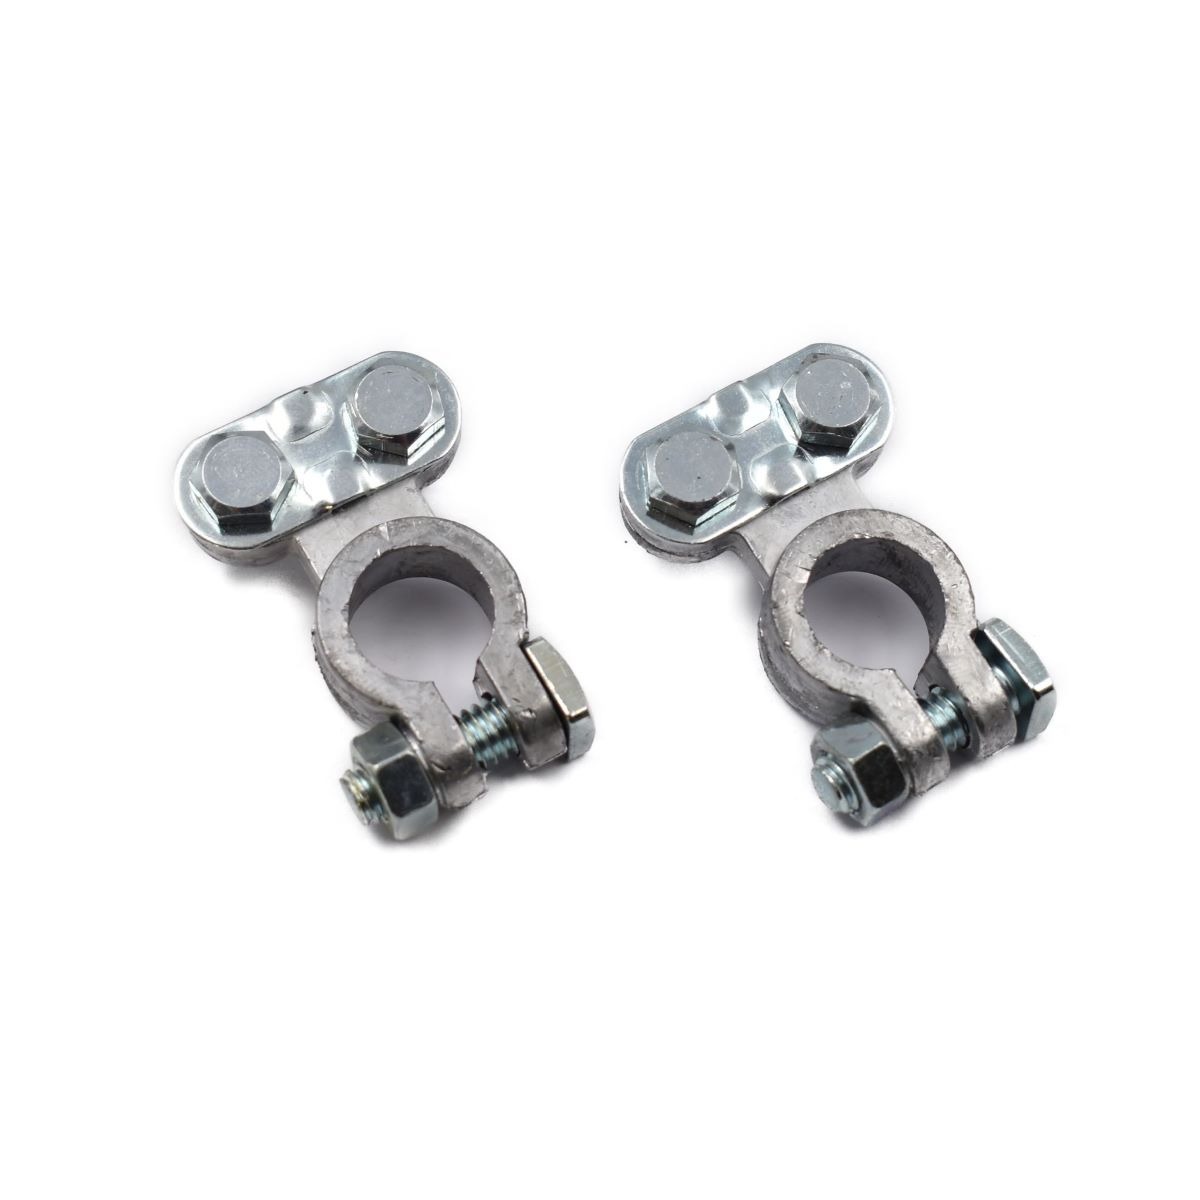 BATTERY CLAMPS UNIVERSAL FOR NORMAL POLES Extra info: Set of 2 pieces DIN poles (16 and 18 mm)